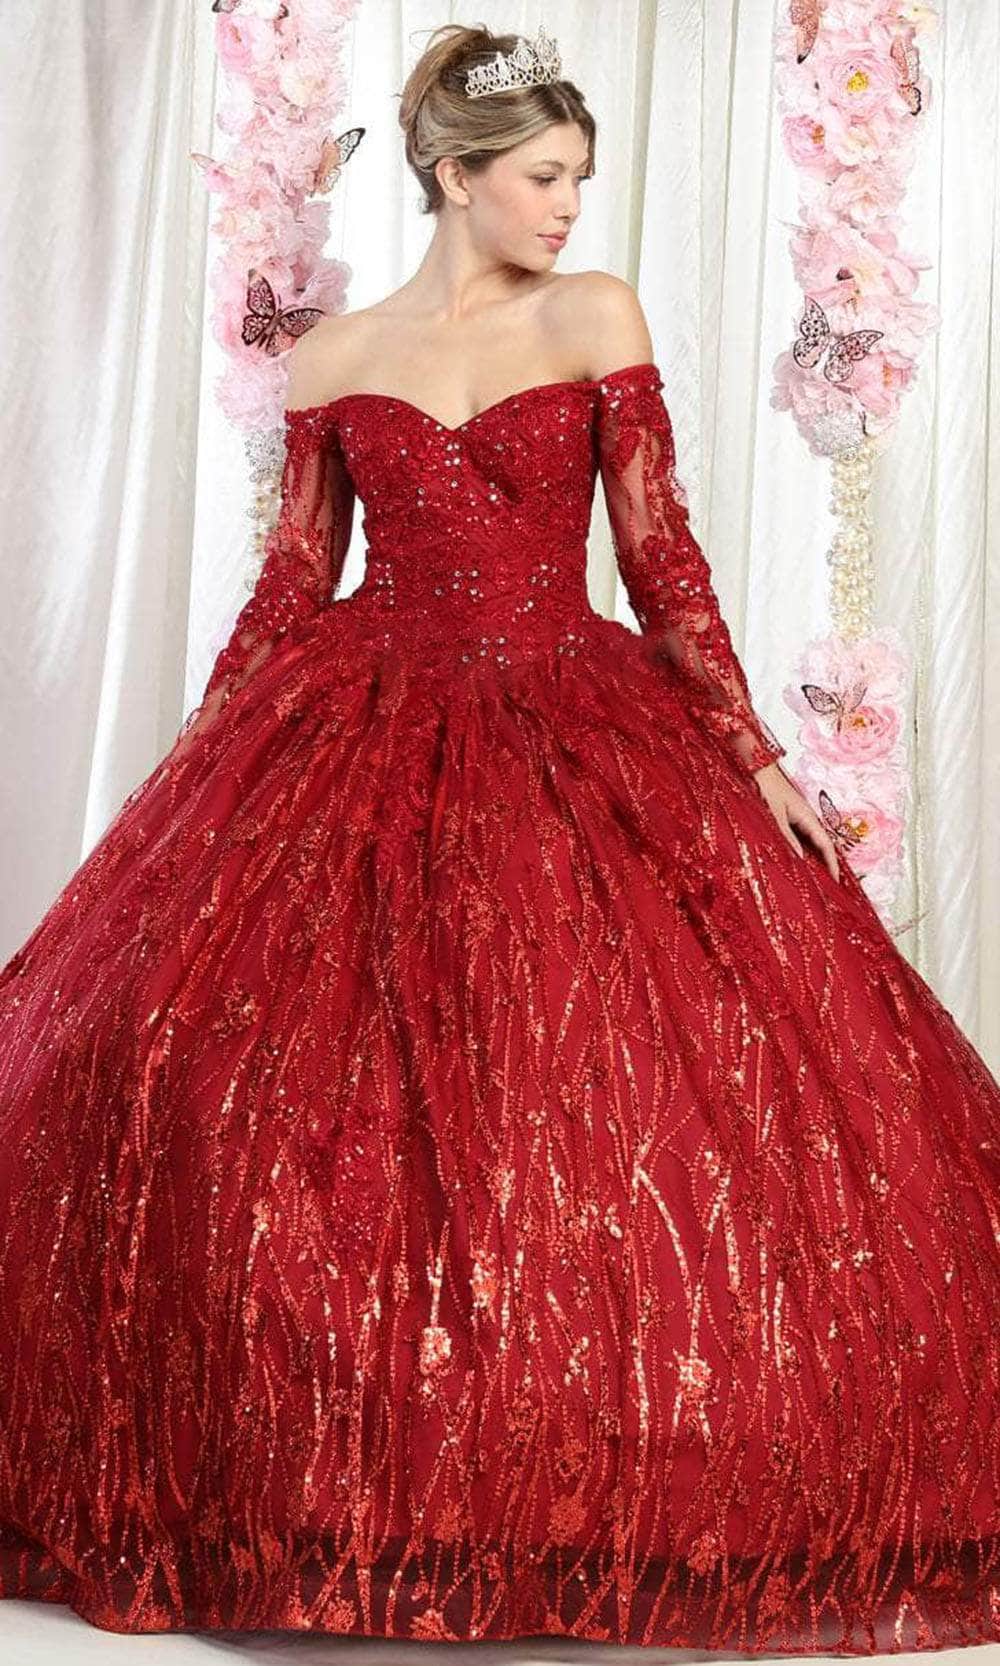 Image of May Queen LK162 - Long Sleeve Sequin Prom Ballgown